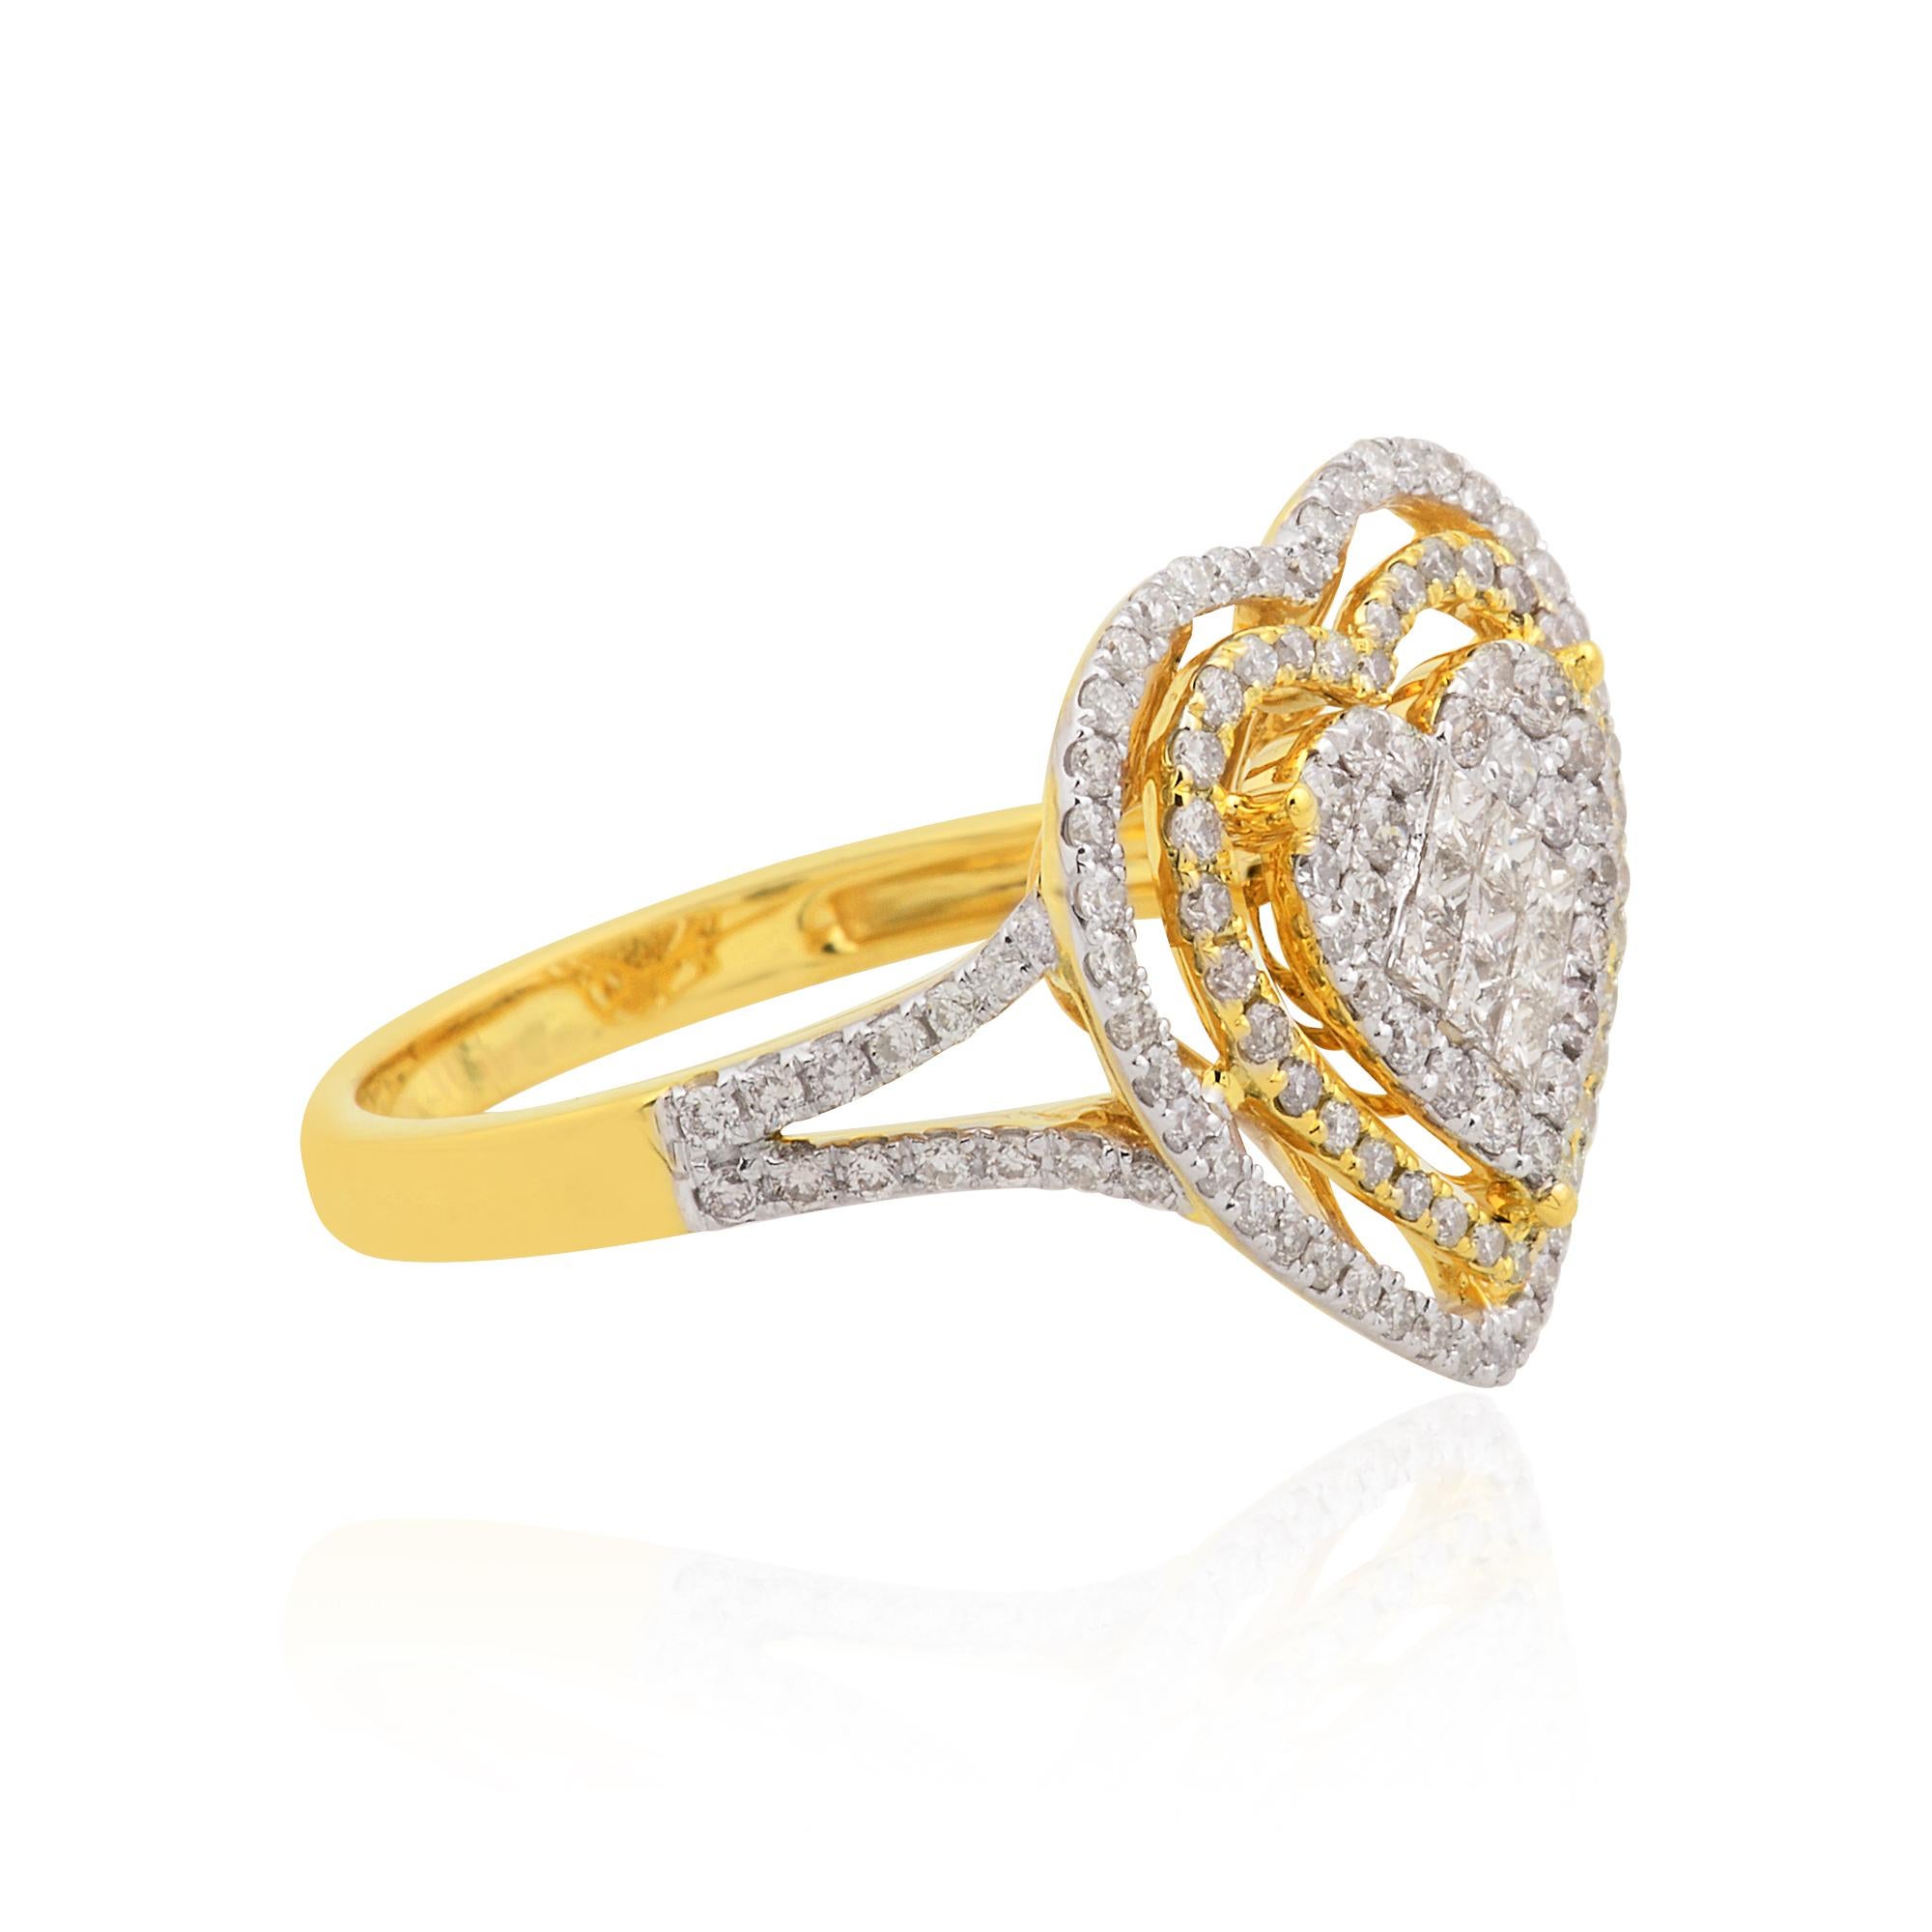 For Sale:  1.30 Carat SI Clarity HI Color Diamond Pave Heart Ring 18k Yellow Gold Jewelry 3